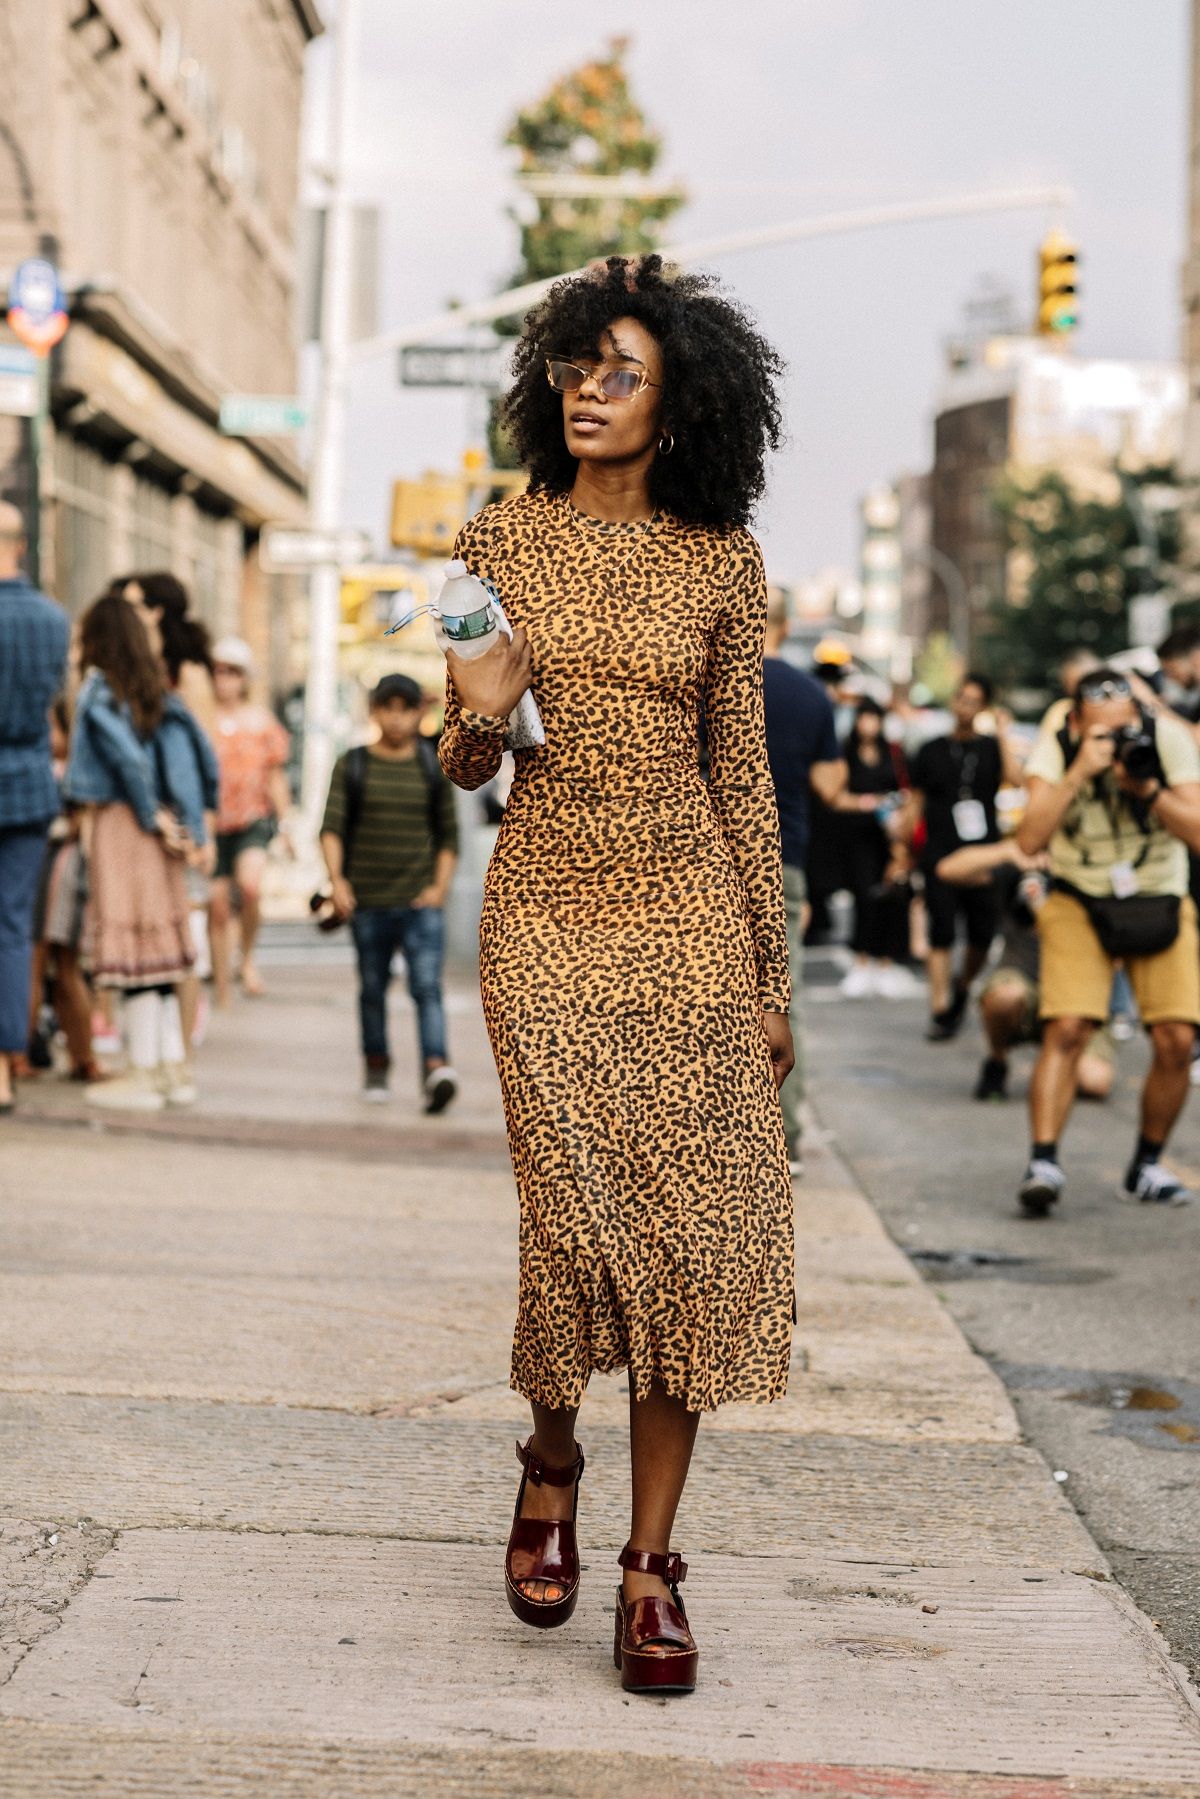 Animal Print Fashion Styles You Will Love